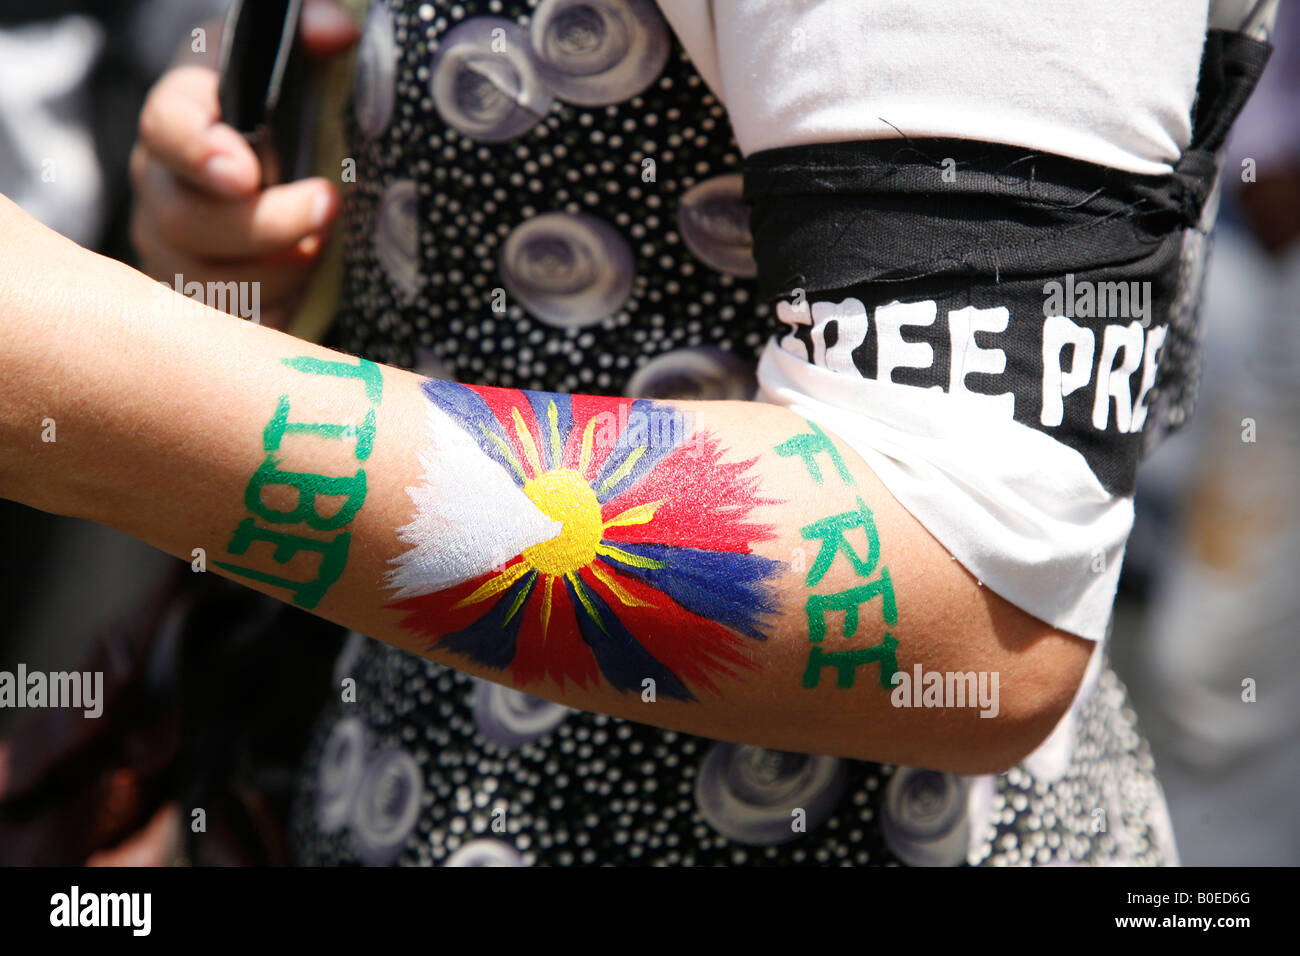 A protester at Janpath New Delhi has a Tibetan flag and a Free Tibet slogan on her arm. Stock Photo